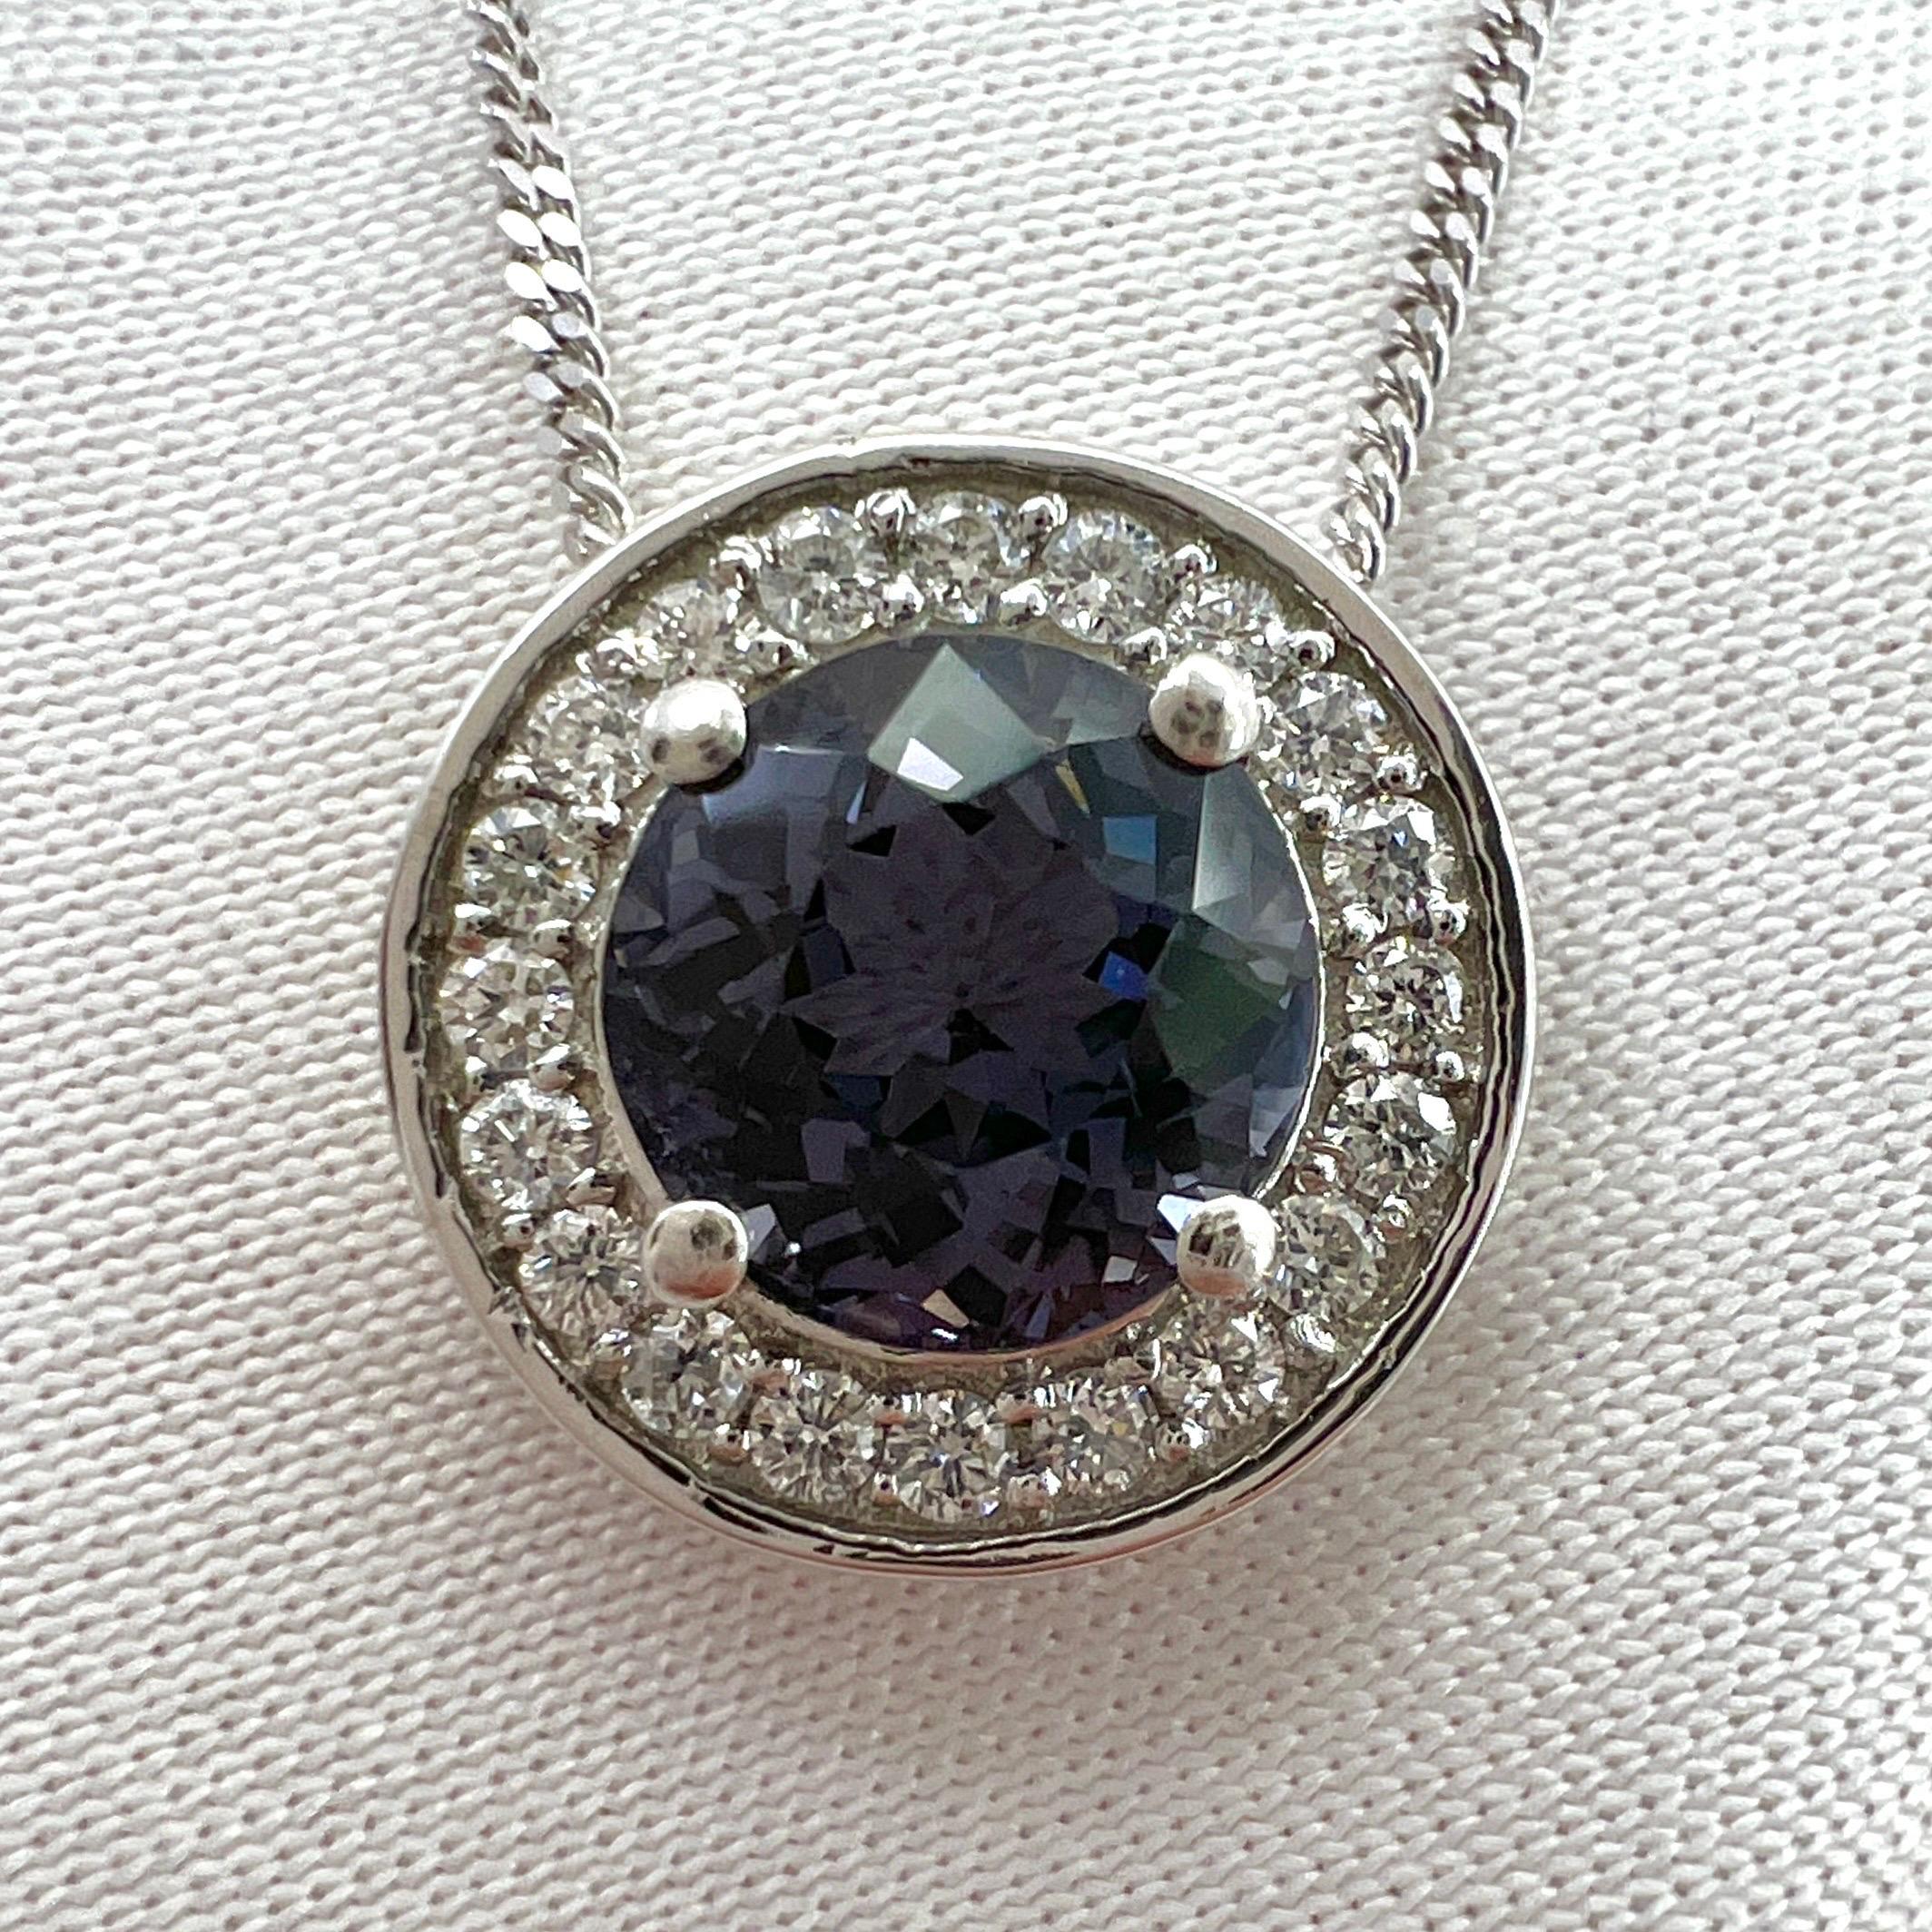 Fine Purple Titanium Spinel And Diamond 950 Platinum Halo Pendant Necklace.

Stunning 1.32 Carat centre spinel with a beautiful and unique purple grey colour. Often referred to as titanium in the trade. This gem has a beautiful colour and excellent